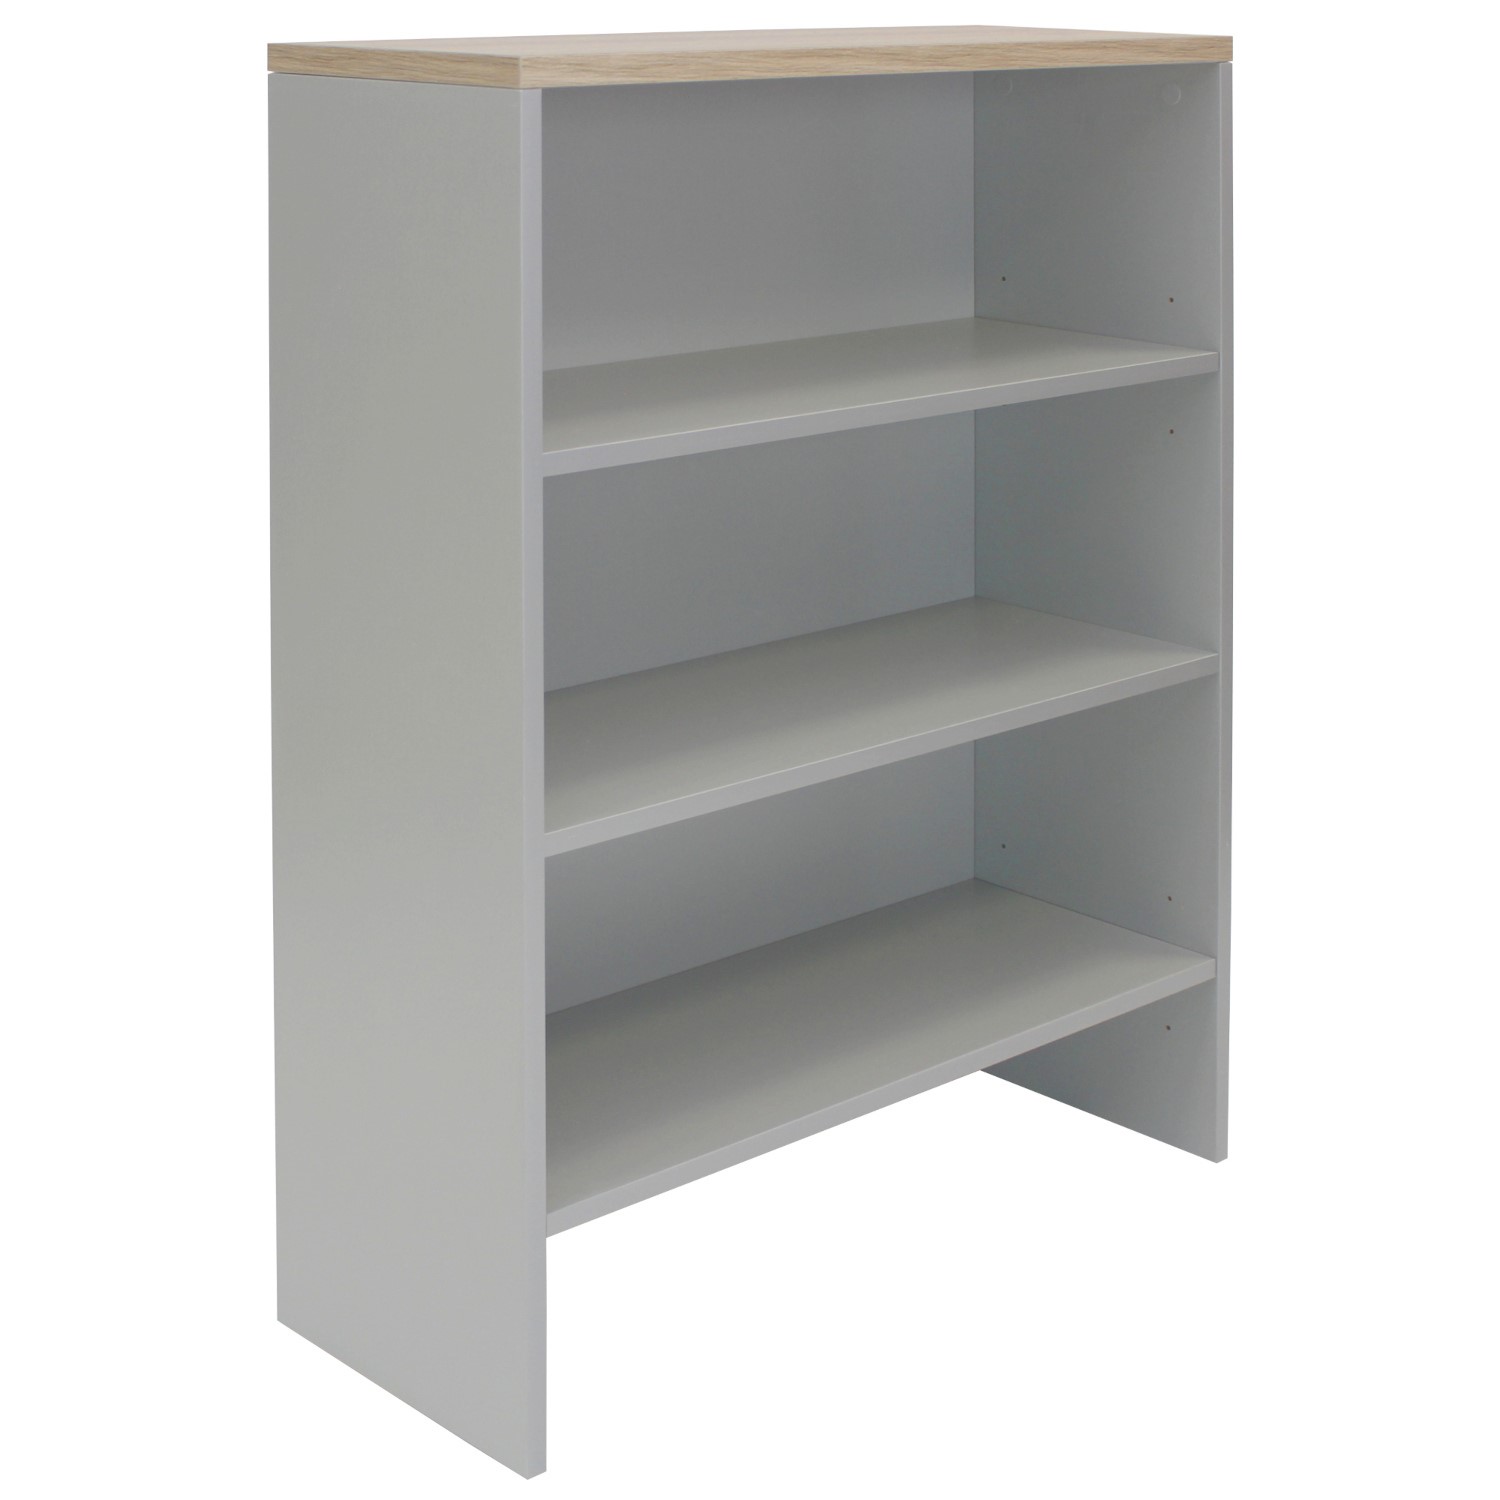 Read more about Light grey wide wall mounted bookcase denver